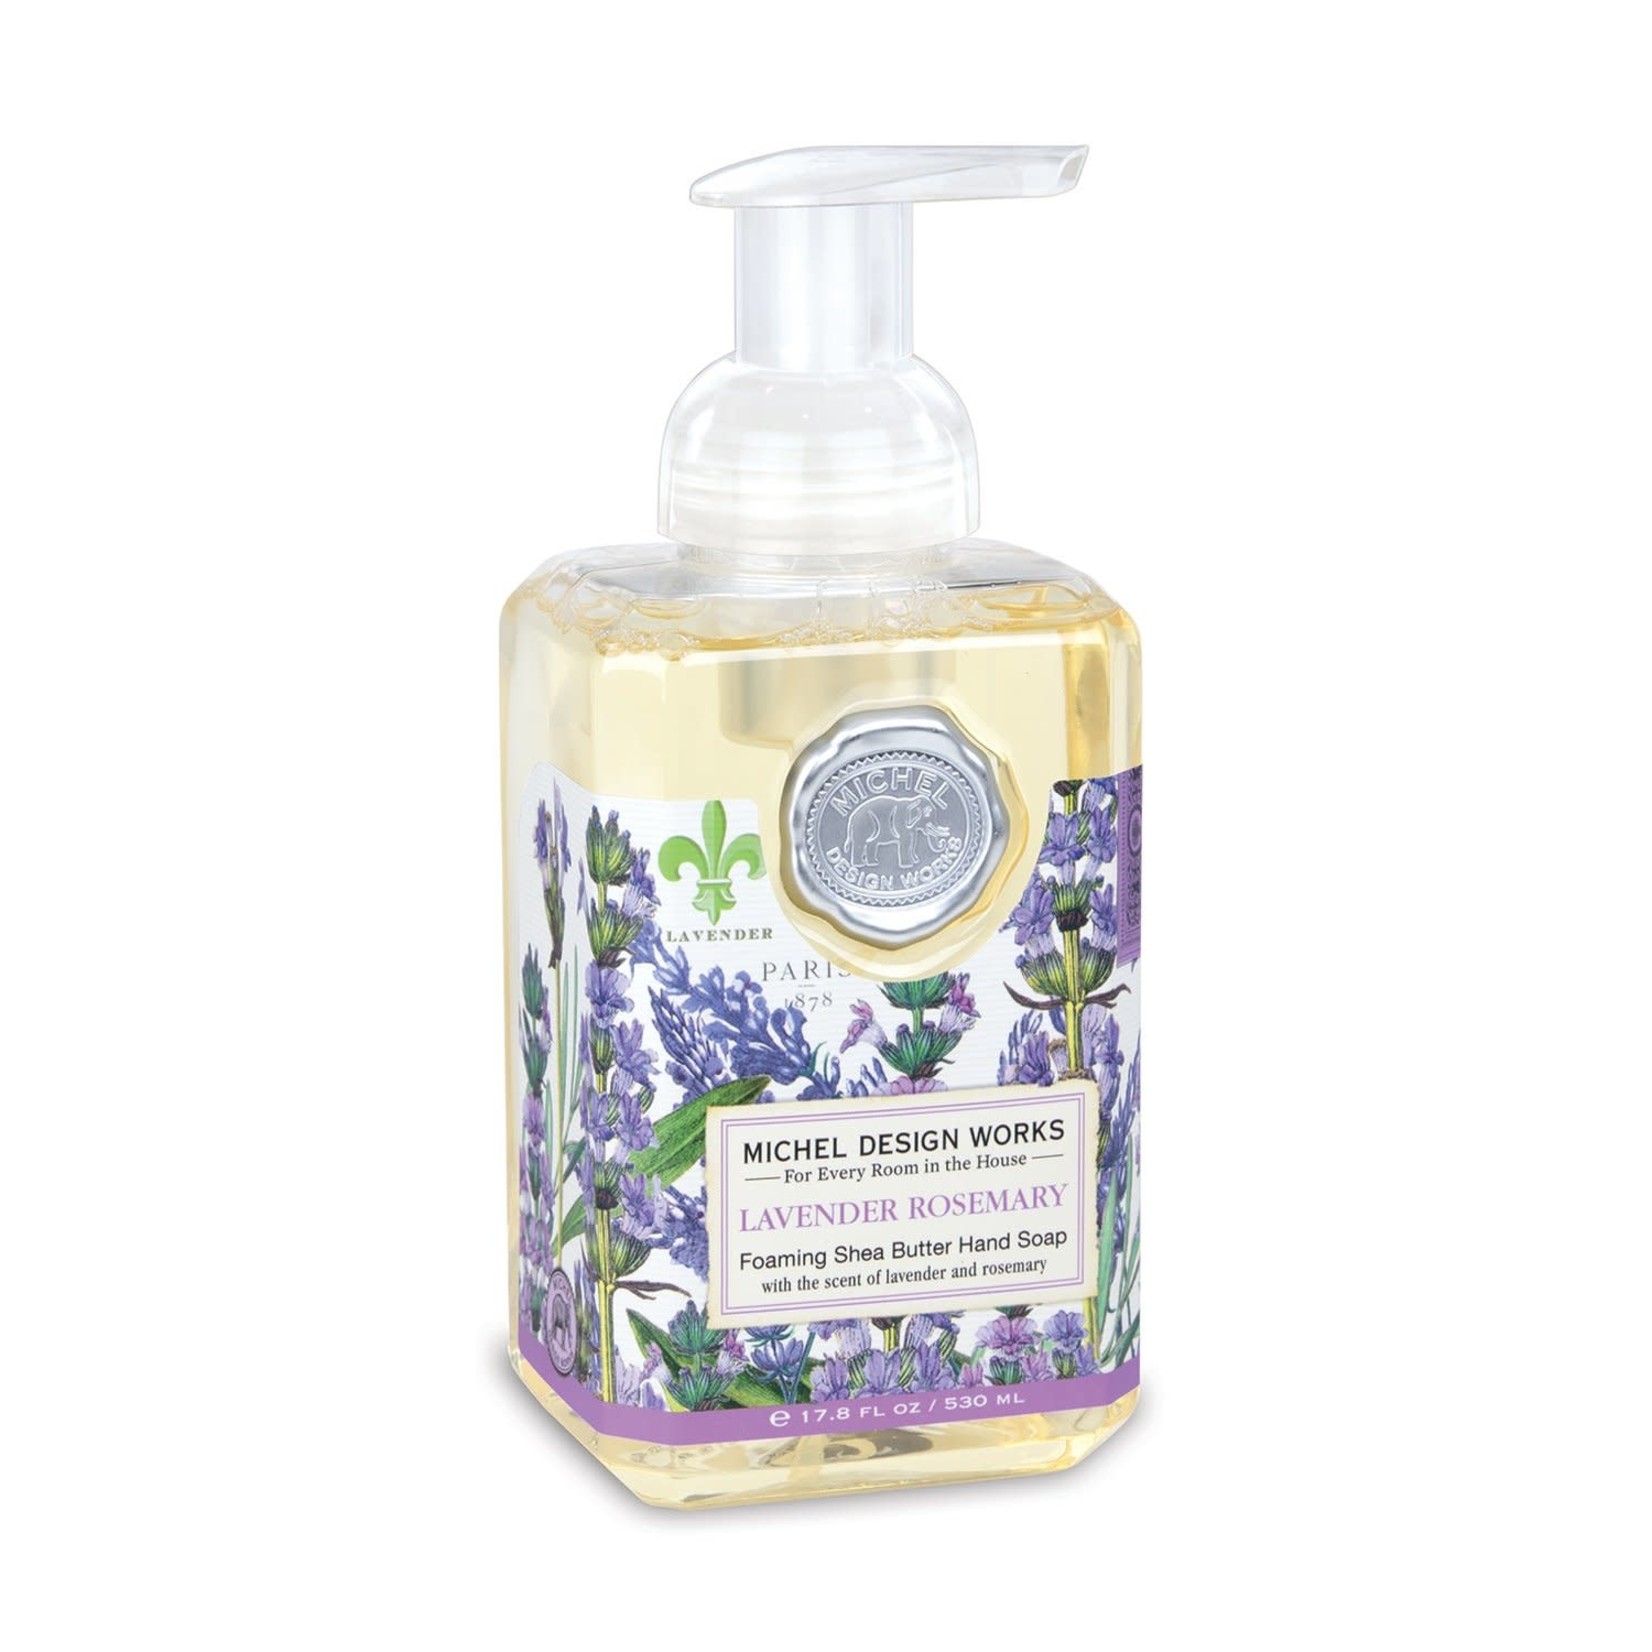 MICHELE DESIGN WORKS LAVENDER ROSEMARY FOAMING HAND SOAP